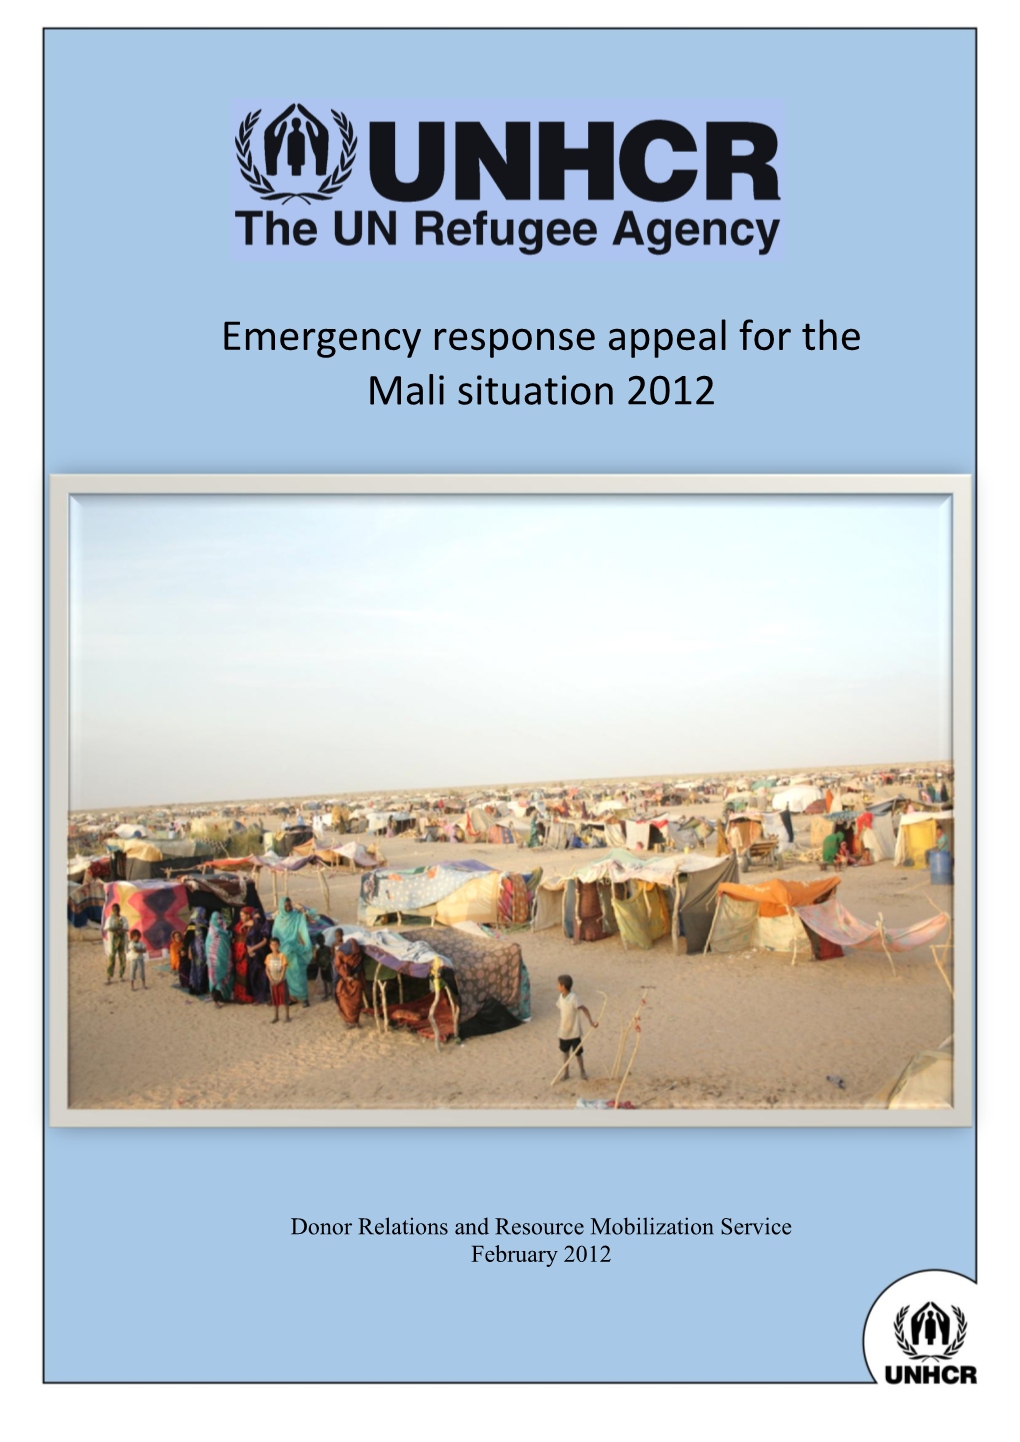 Emergency Response Appeal for the Mali Situation 2012